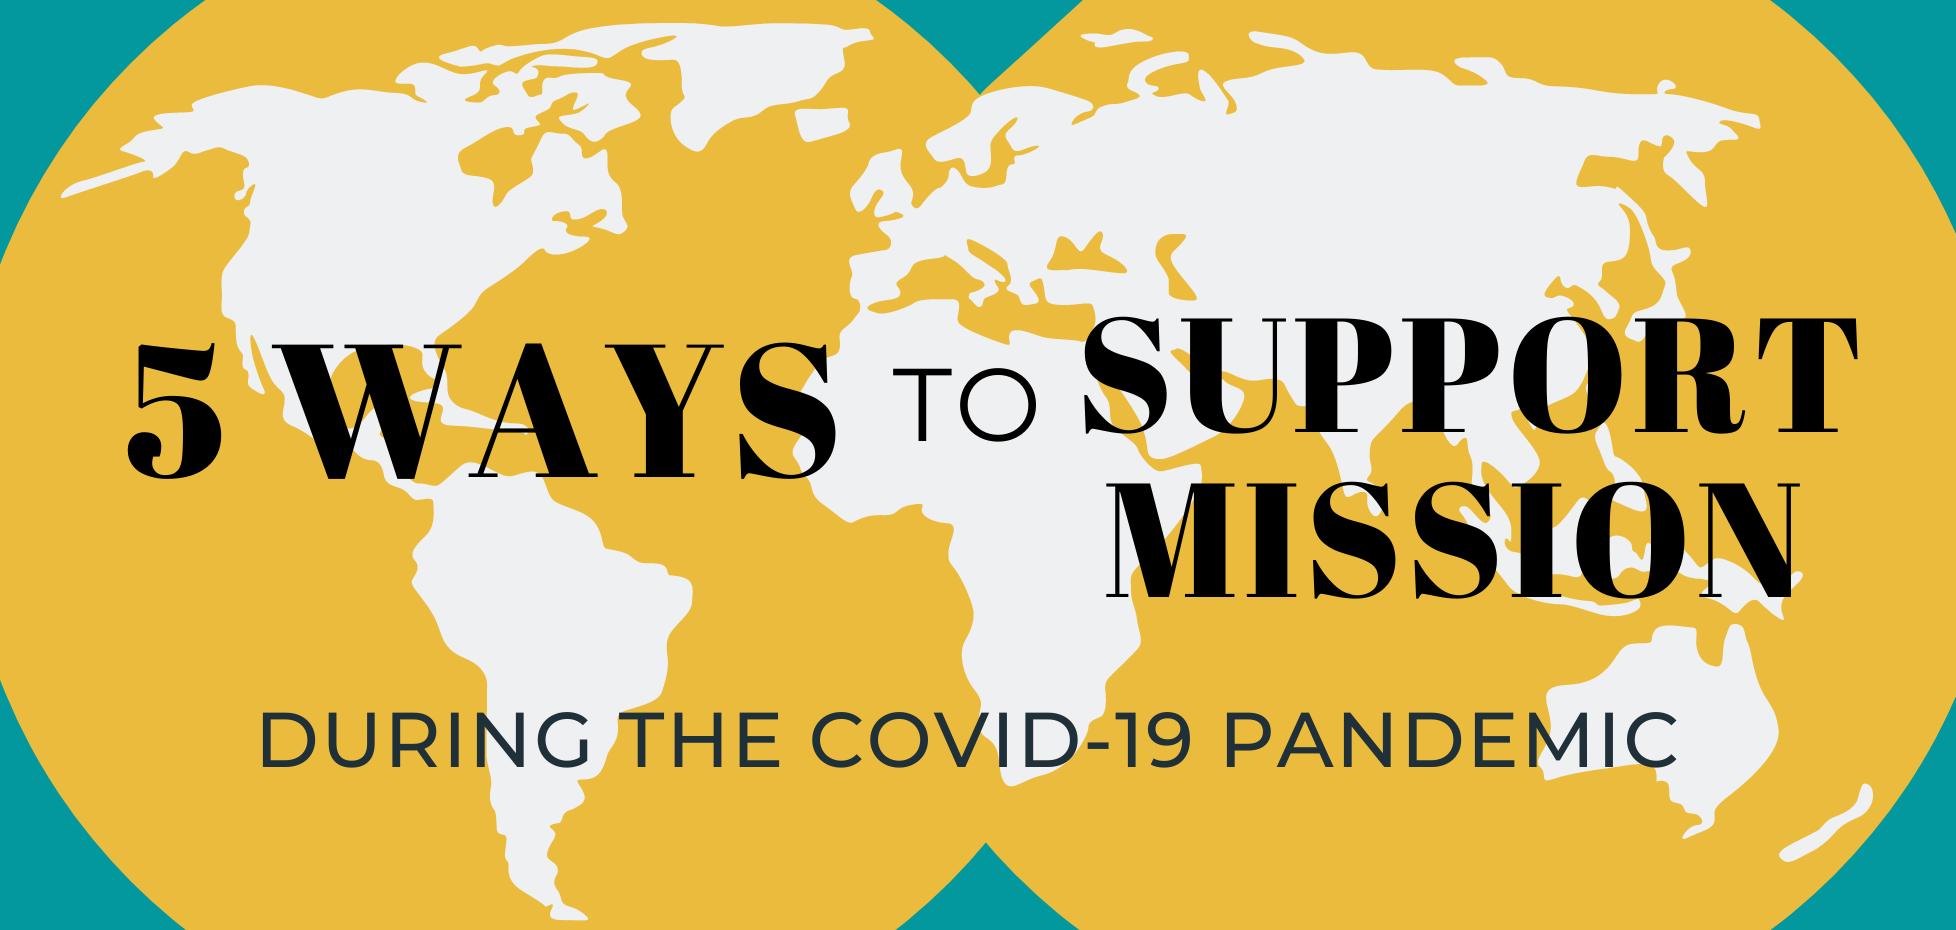 5 Ways to Support Mission During COVID